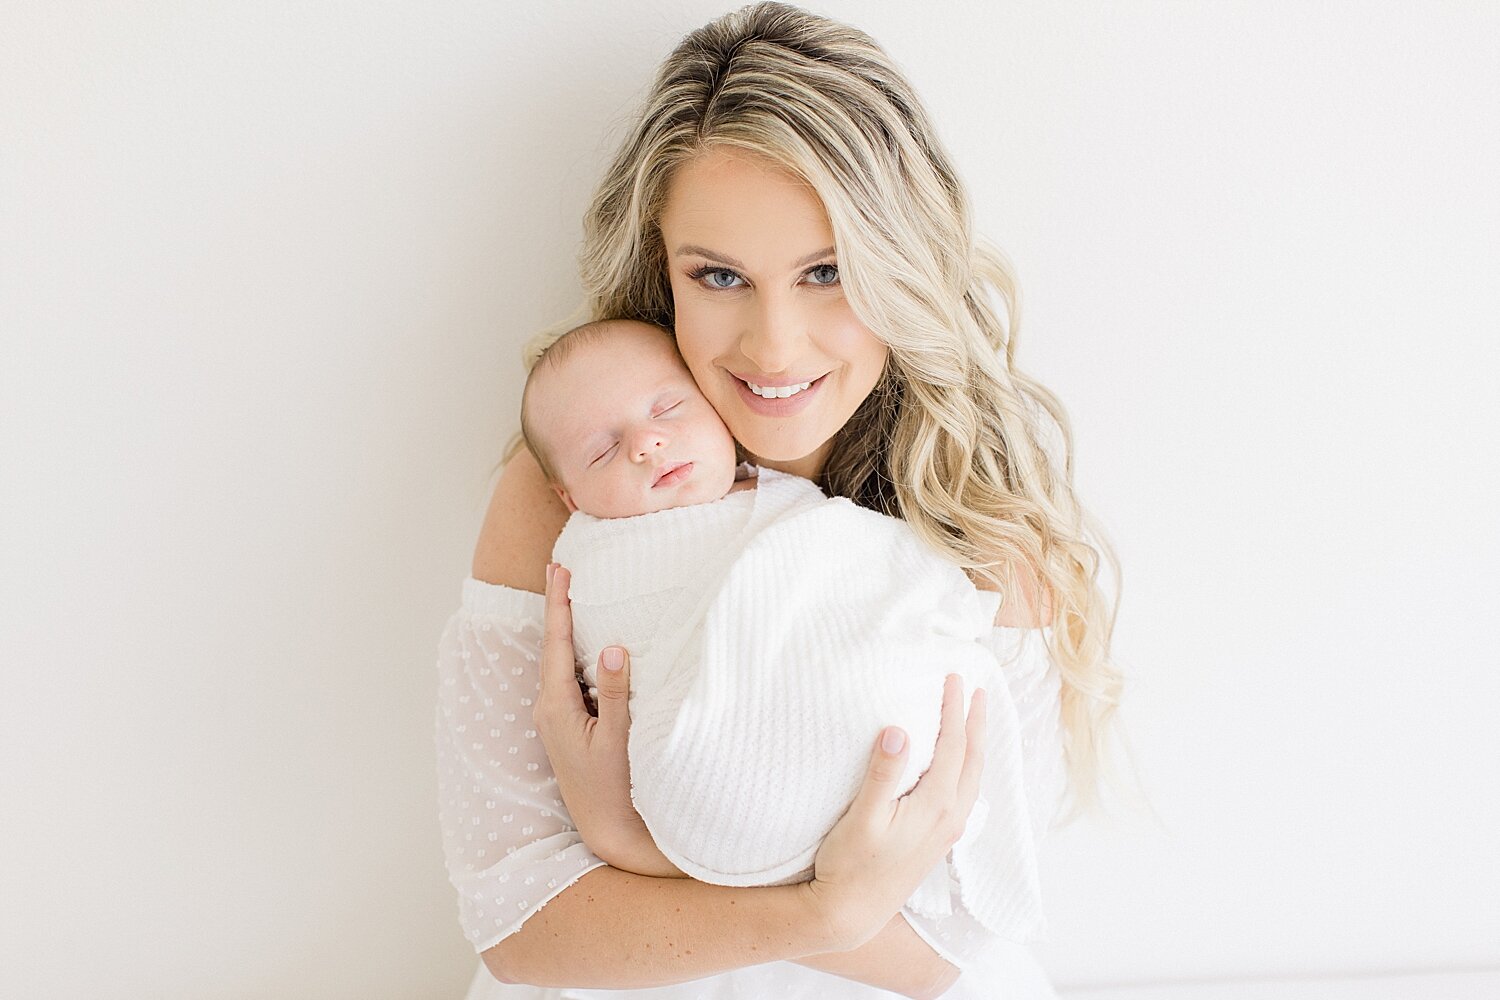 Mom snuggling her baby boy | Ambre Williams Photography